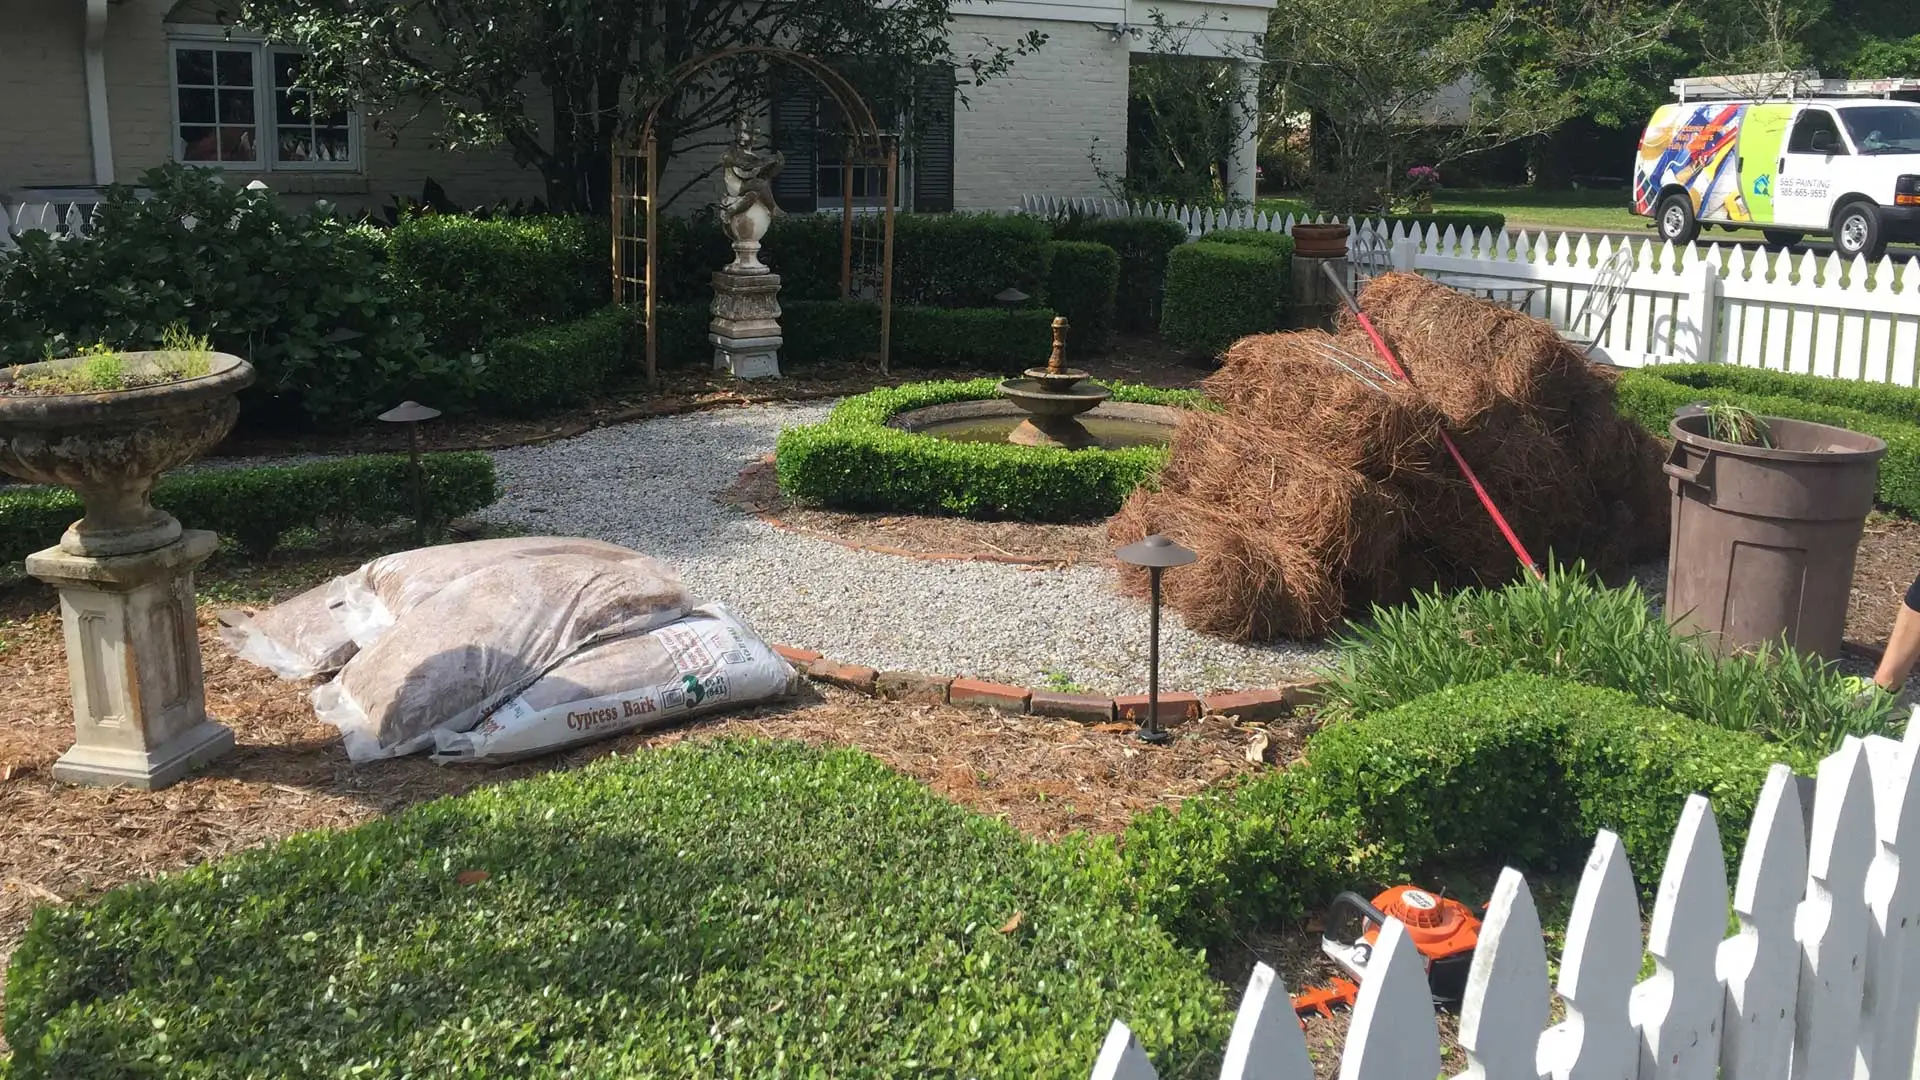 Lafourche Lawn & Farm employees laying new sod and mulch at a home in Thibodaux. Start your new career with our team today!